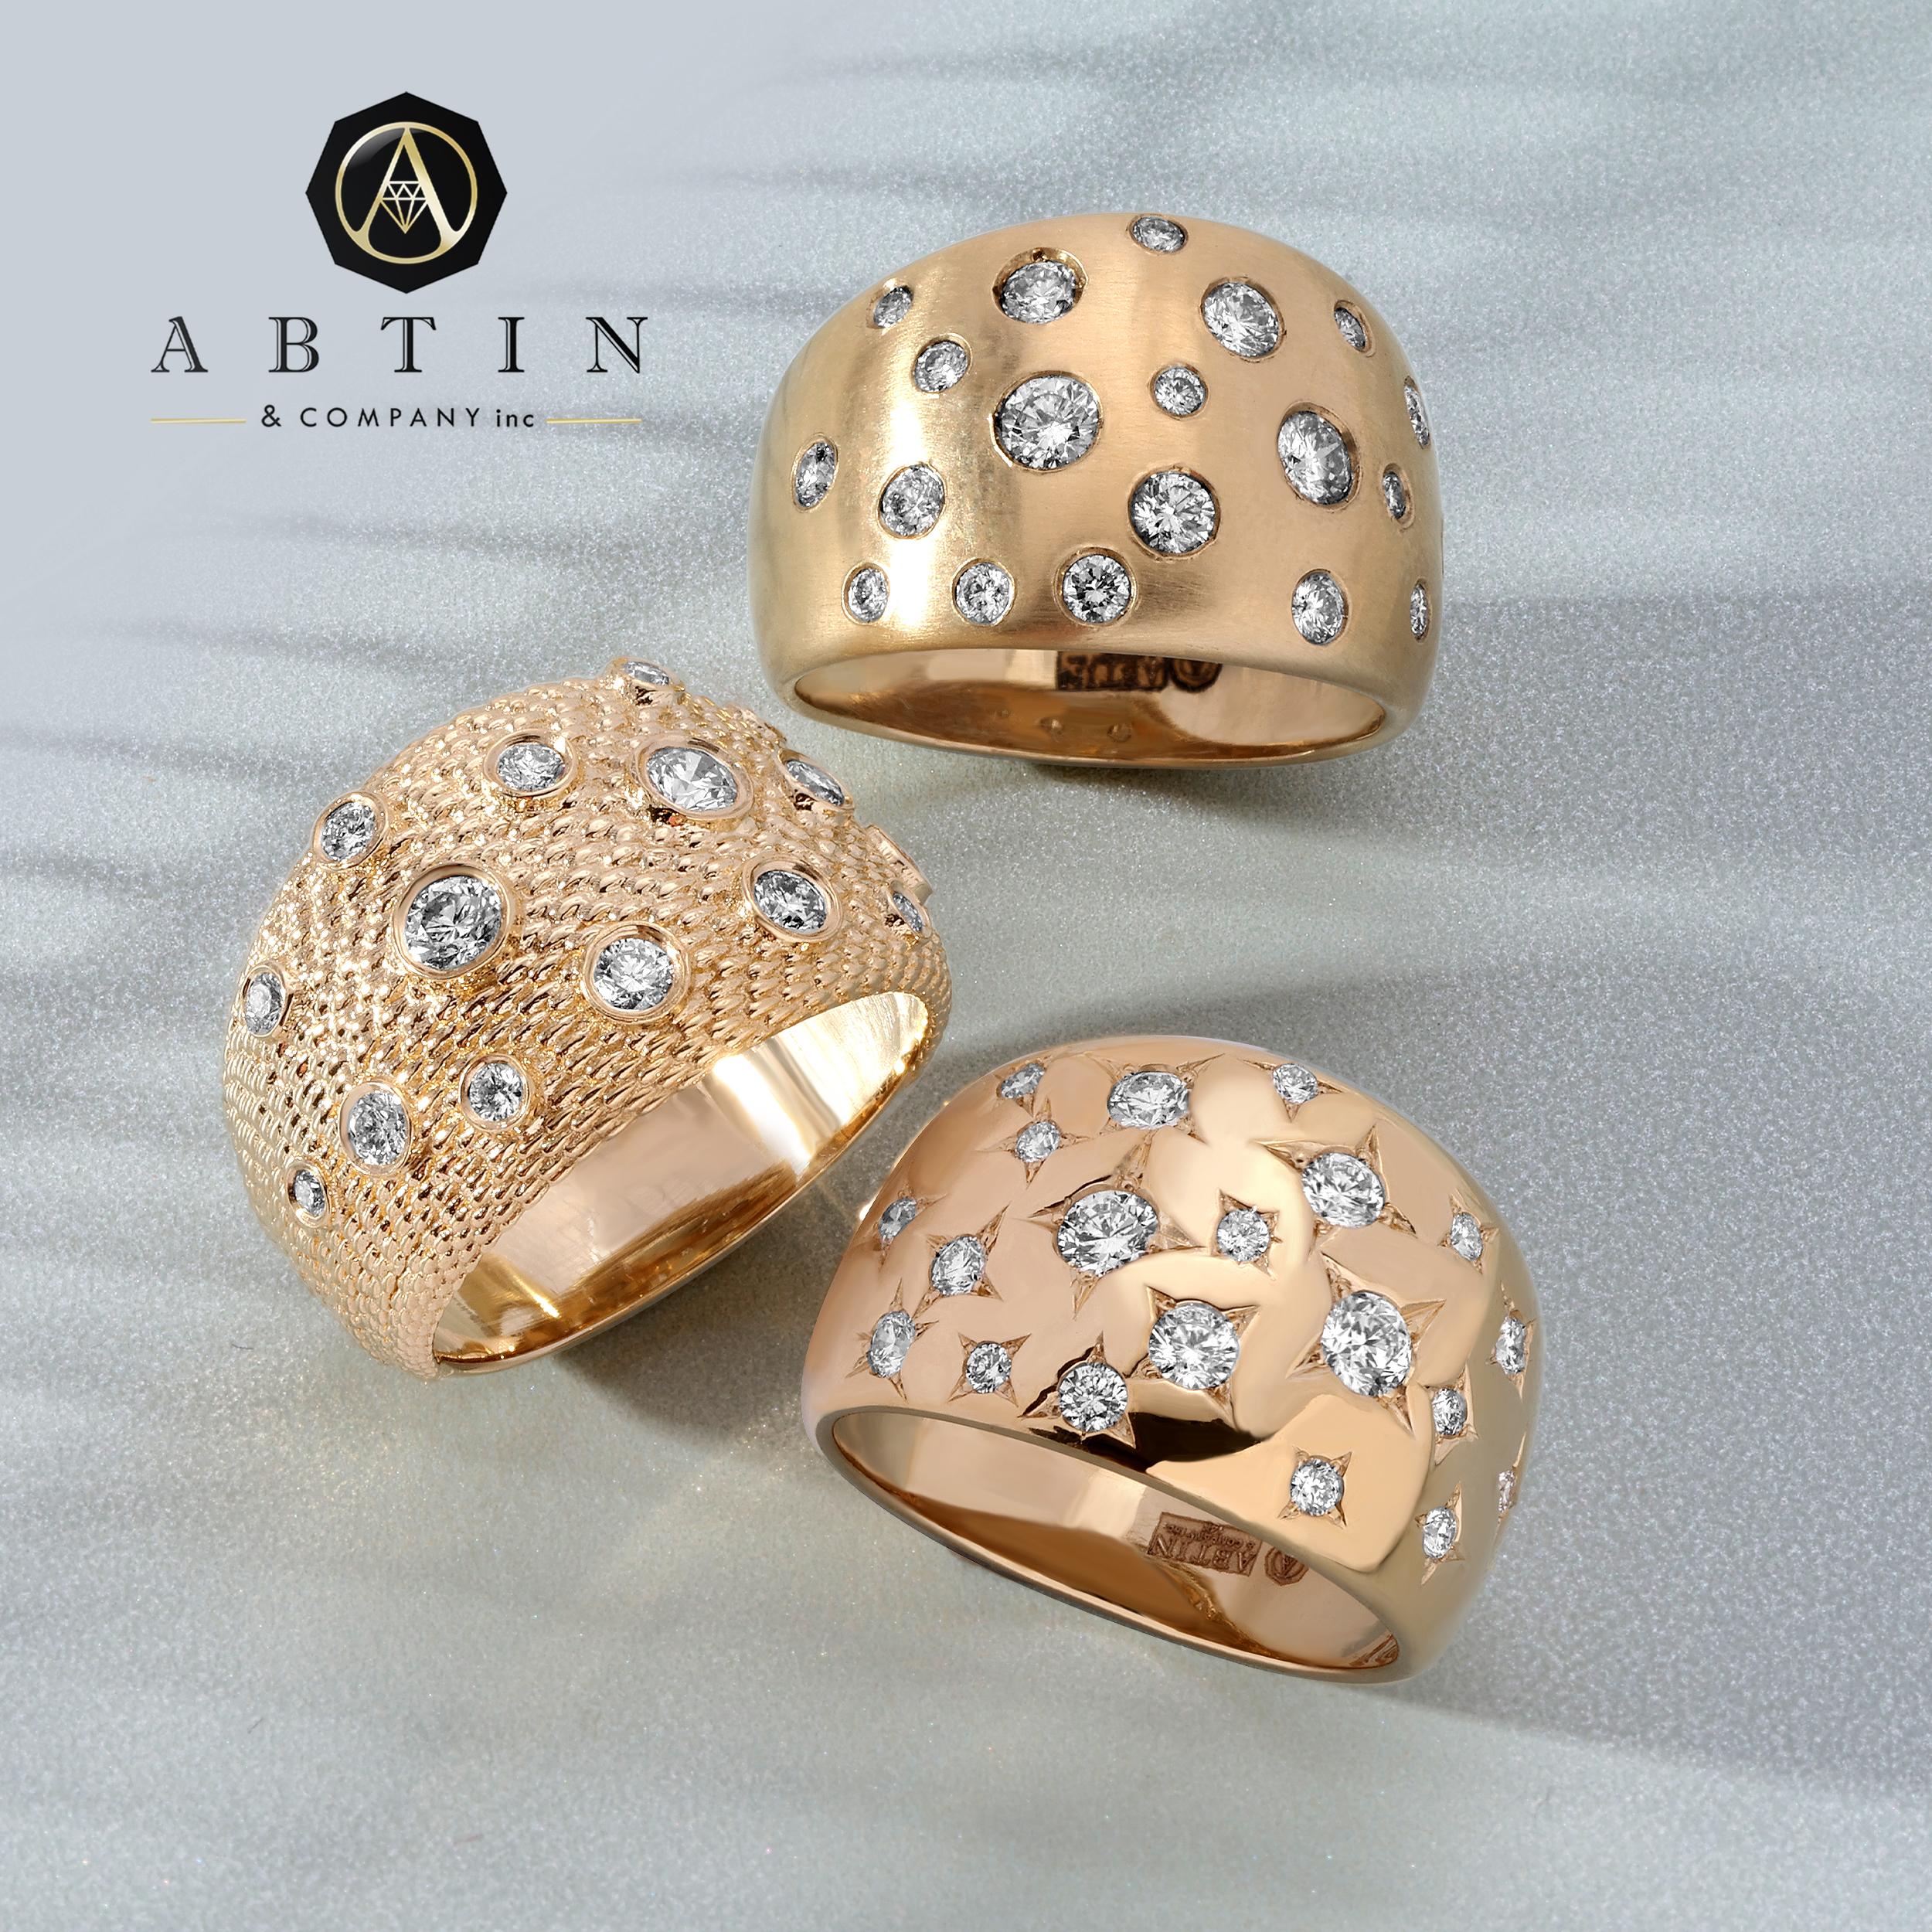 Made of 14k gold, this ring exudes a royal aura, providing a regal feel every time you wear it. The bold design showcases white brilliant round diamonds scattered on intricately patterned gold, creating an unparalleled sense of grandeur.
Gold